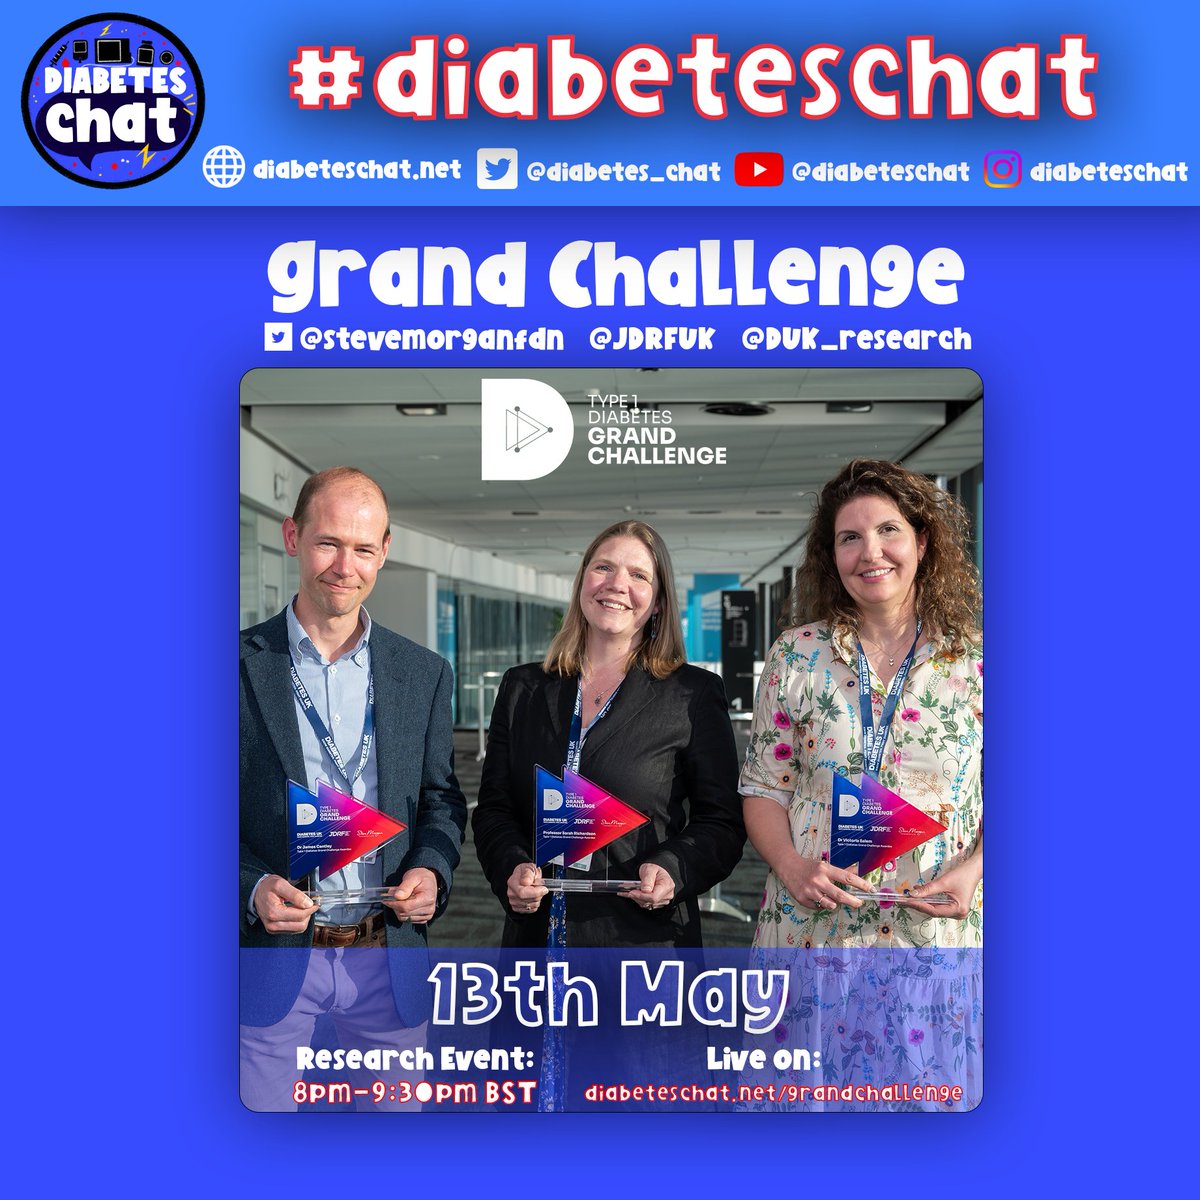 Come join the #DiabetesChat community for our 5⃣th Research Event🔬 This time we welcome #Type1DiabetesGrandChallenge and 3 of the researchers: 🗣️ Dr James Cantley 🗣️ Prof Sarah Richardson 🗣️ Dr Victoria Salem 🗓️ Monday 13th May ⏰ 8pm-9:30pm BST 📺 diabeteschat.net/grandchallenge/